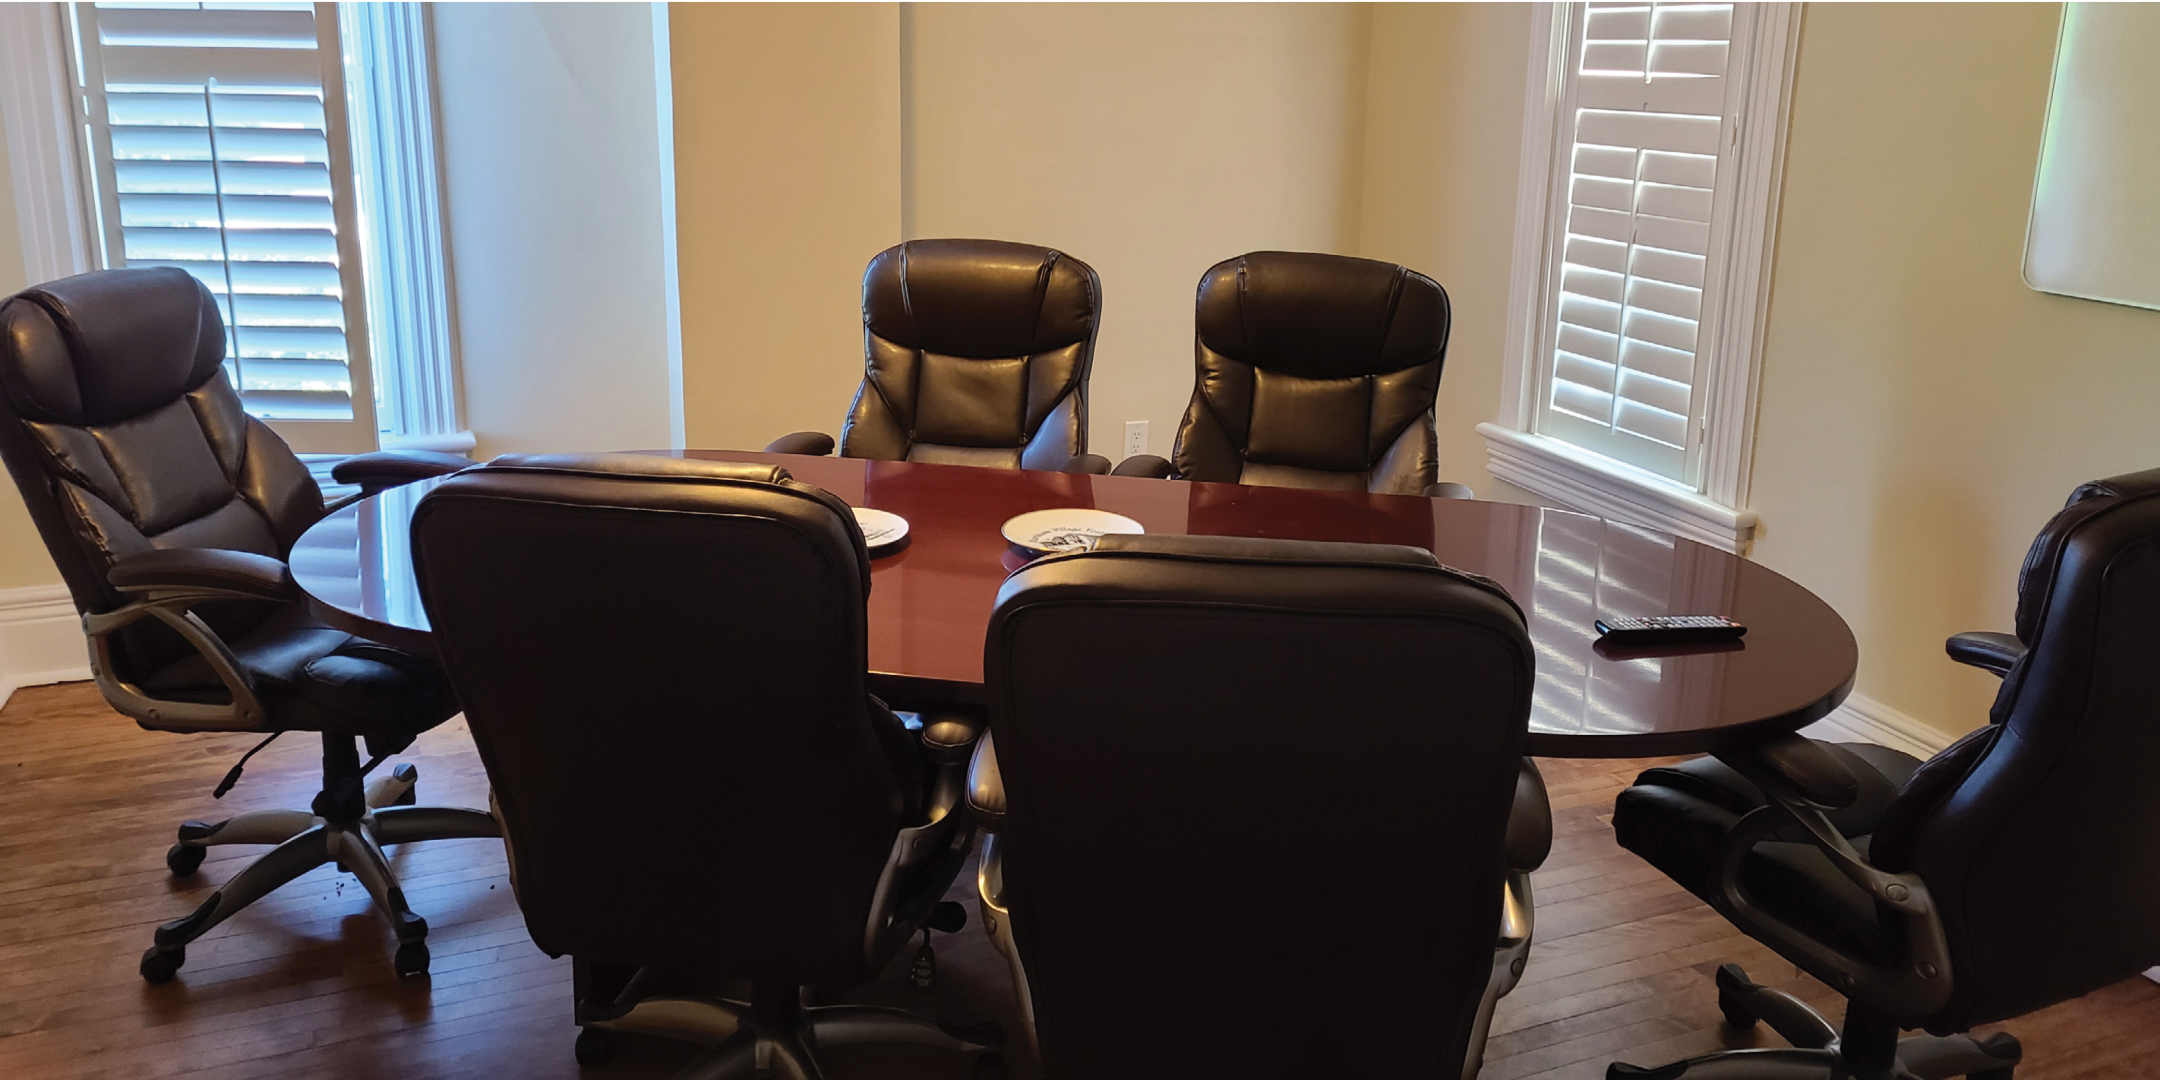 162 Main Street N Meeting area with large wooden table and leather office chairs